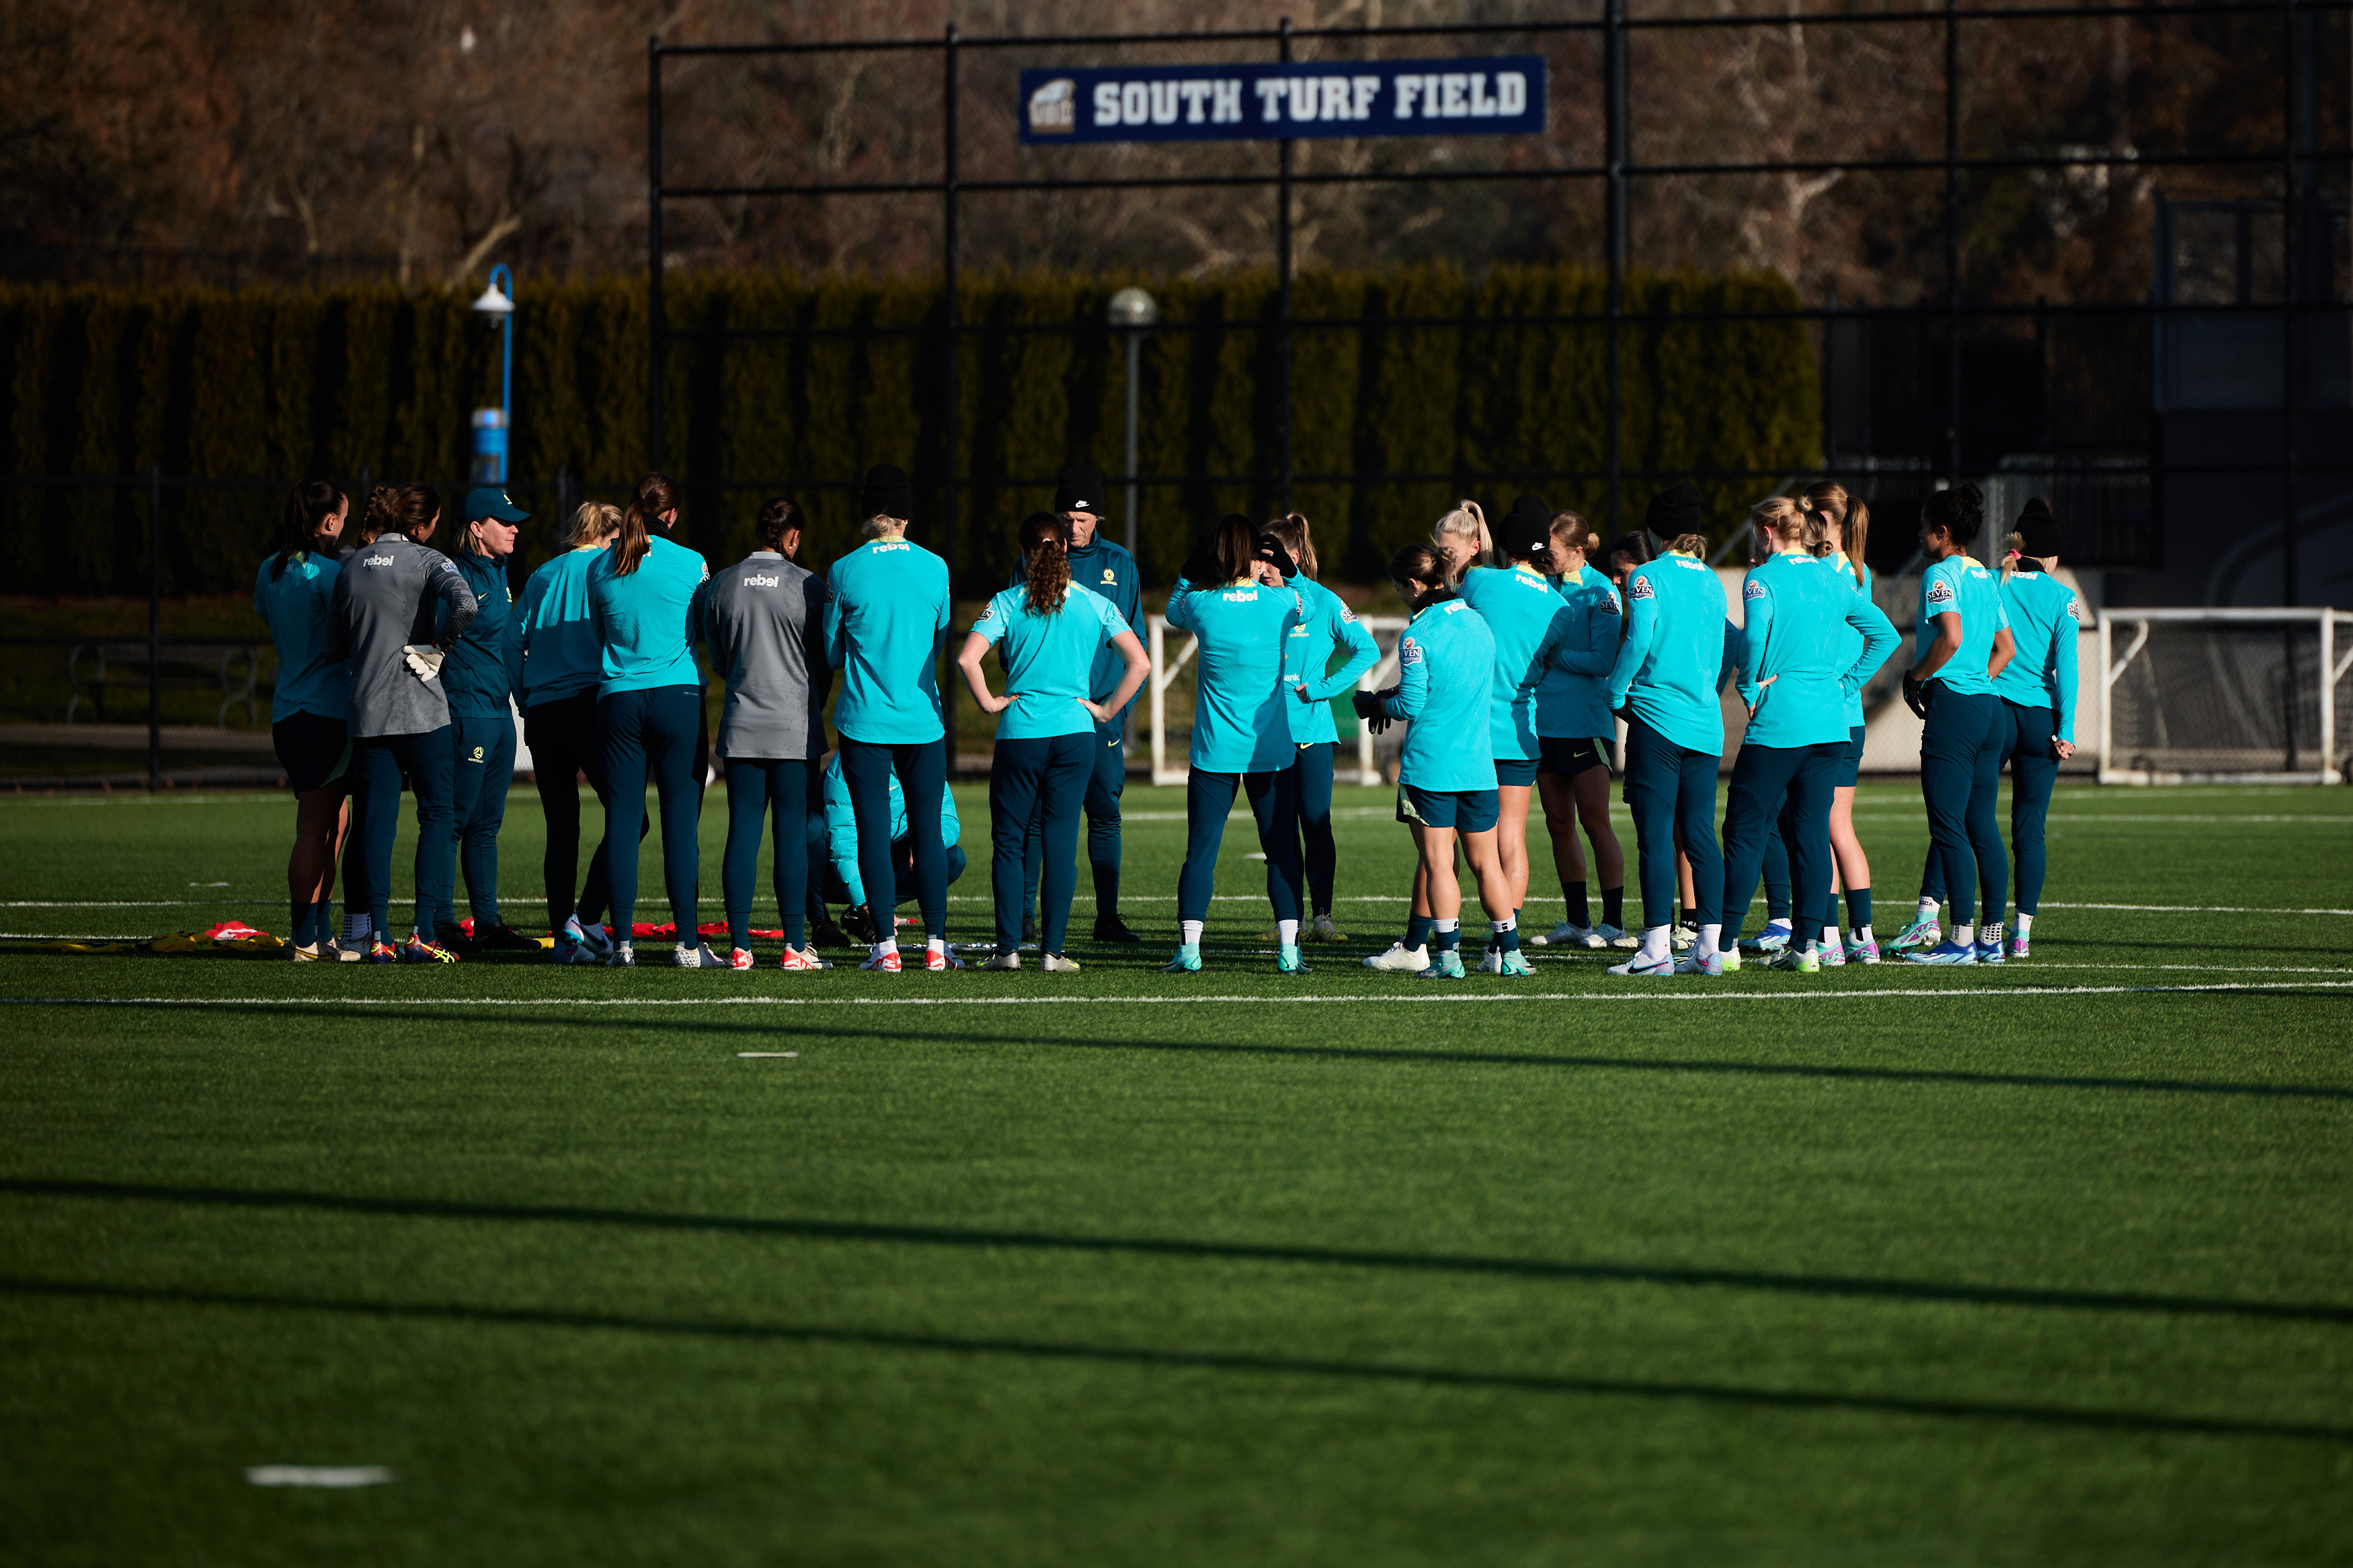 The CommBank Matildas training in Vancouver, Canada. (Photo: Rachel Bach/By The White Line)